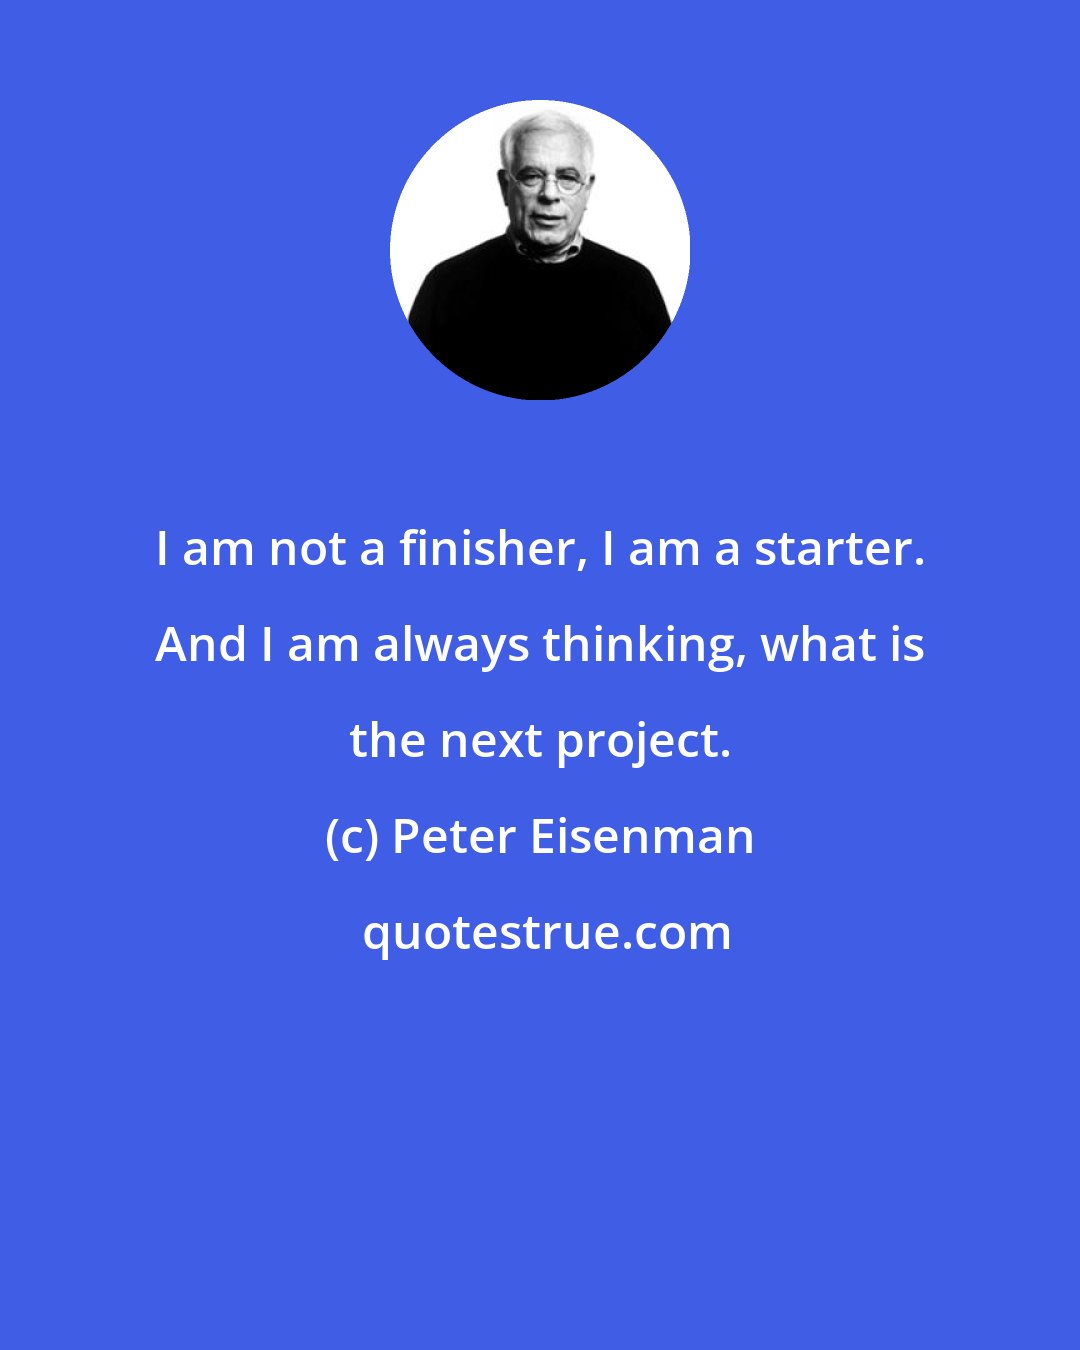 Peter Eisenman: I am not a finisher, I am a starter. And I am always thinking, what is the next project.